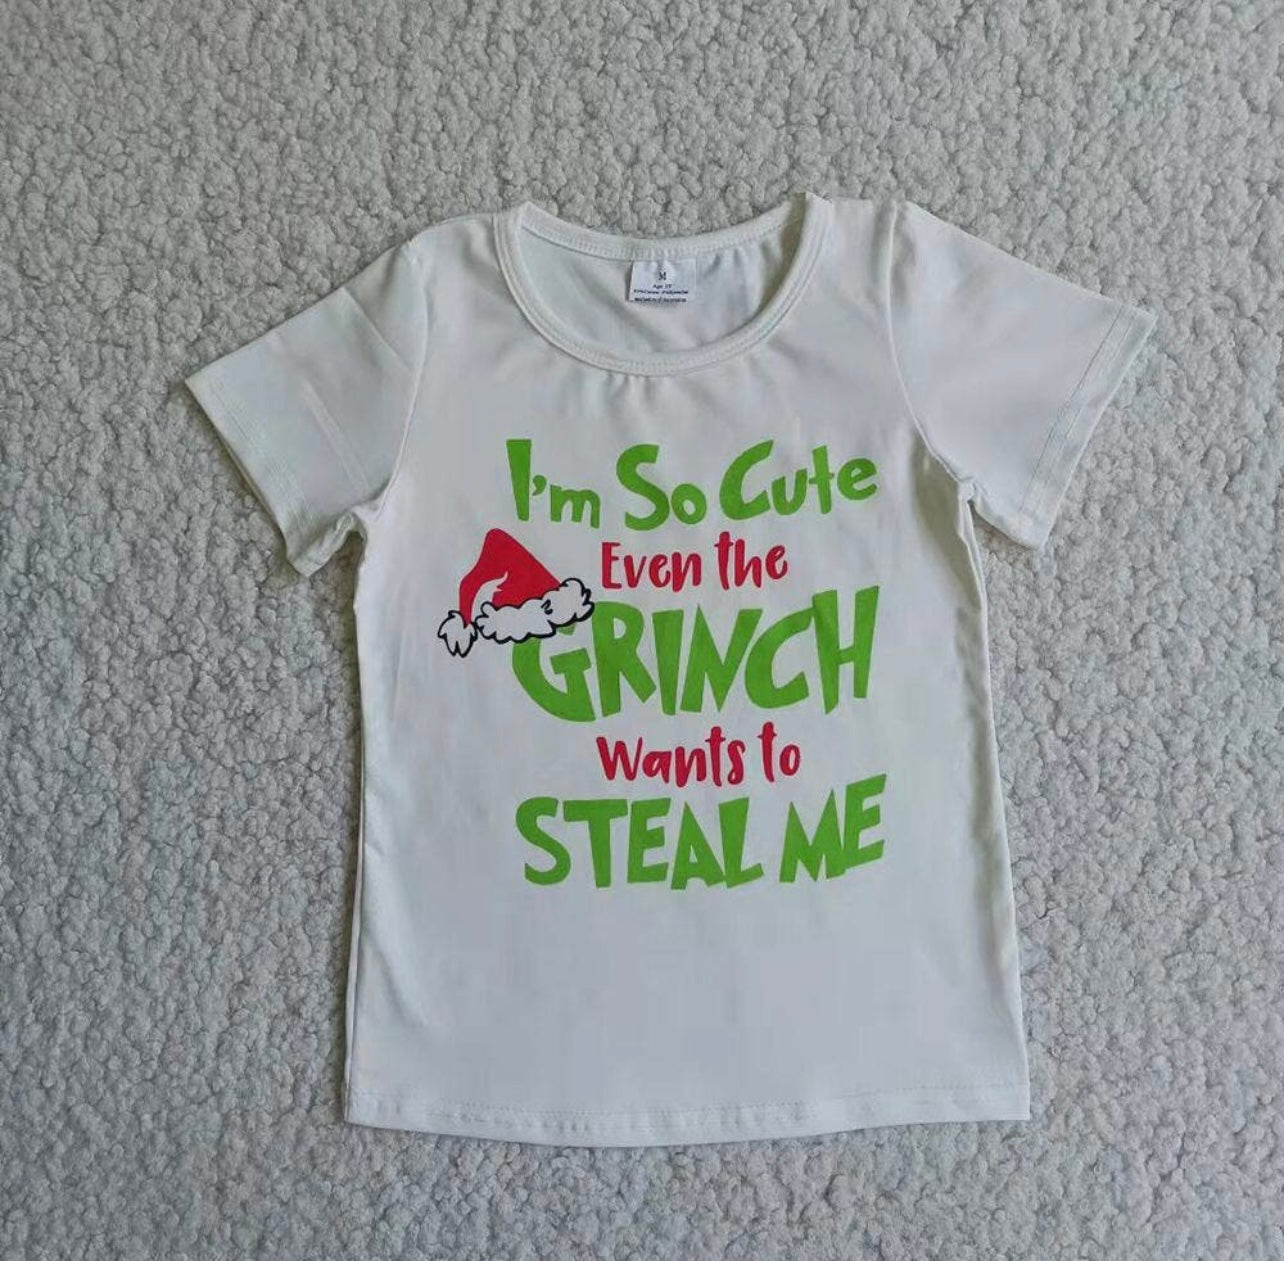 Grinch wants to steal me tshirt